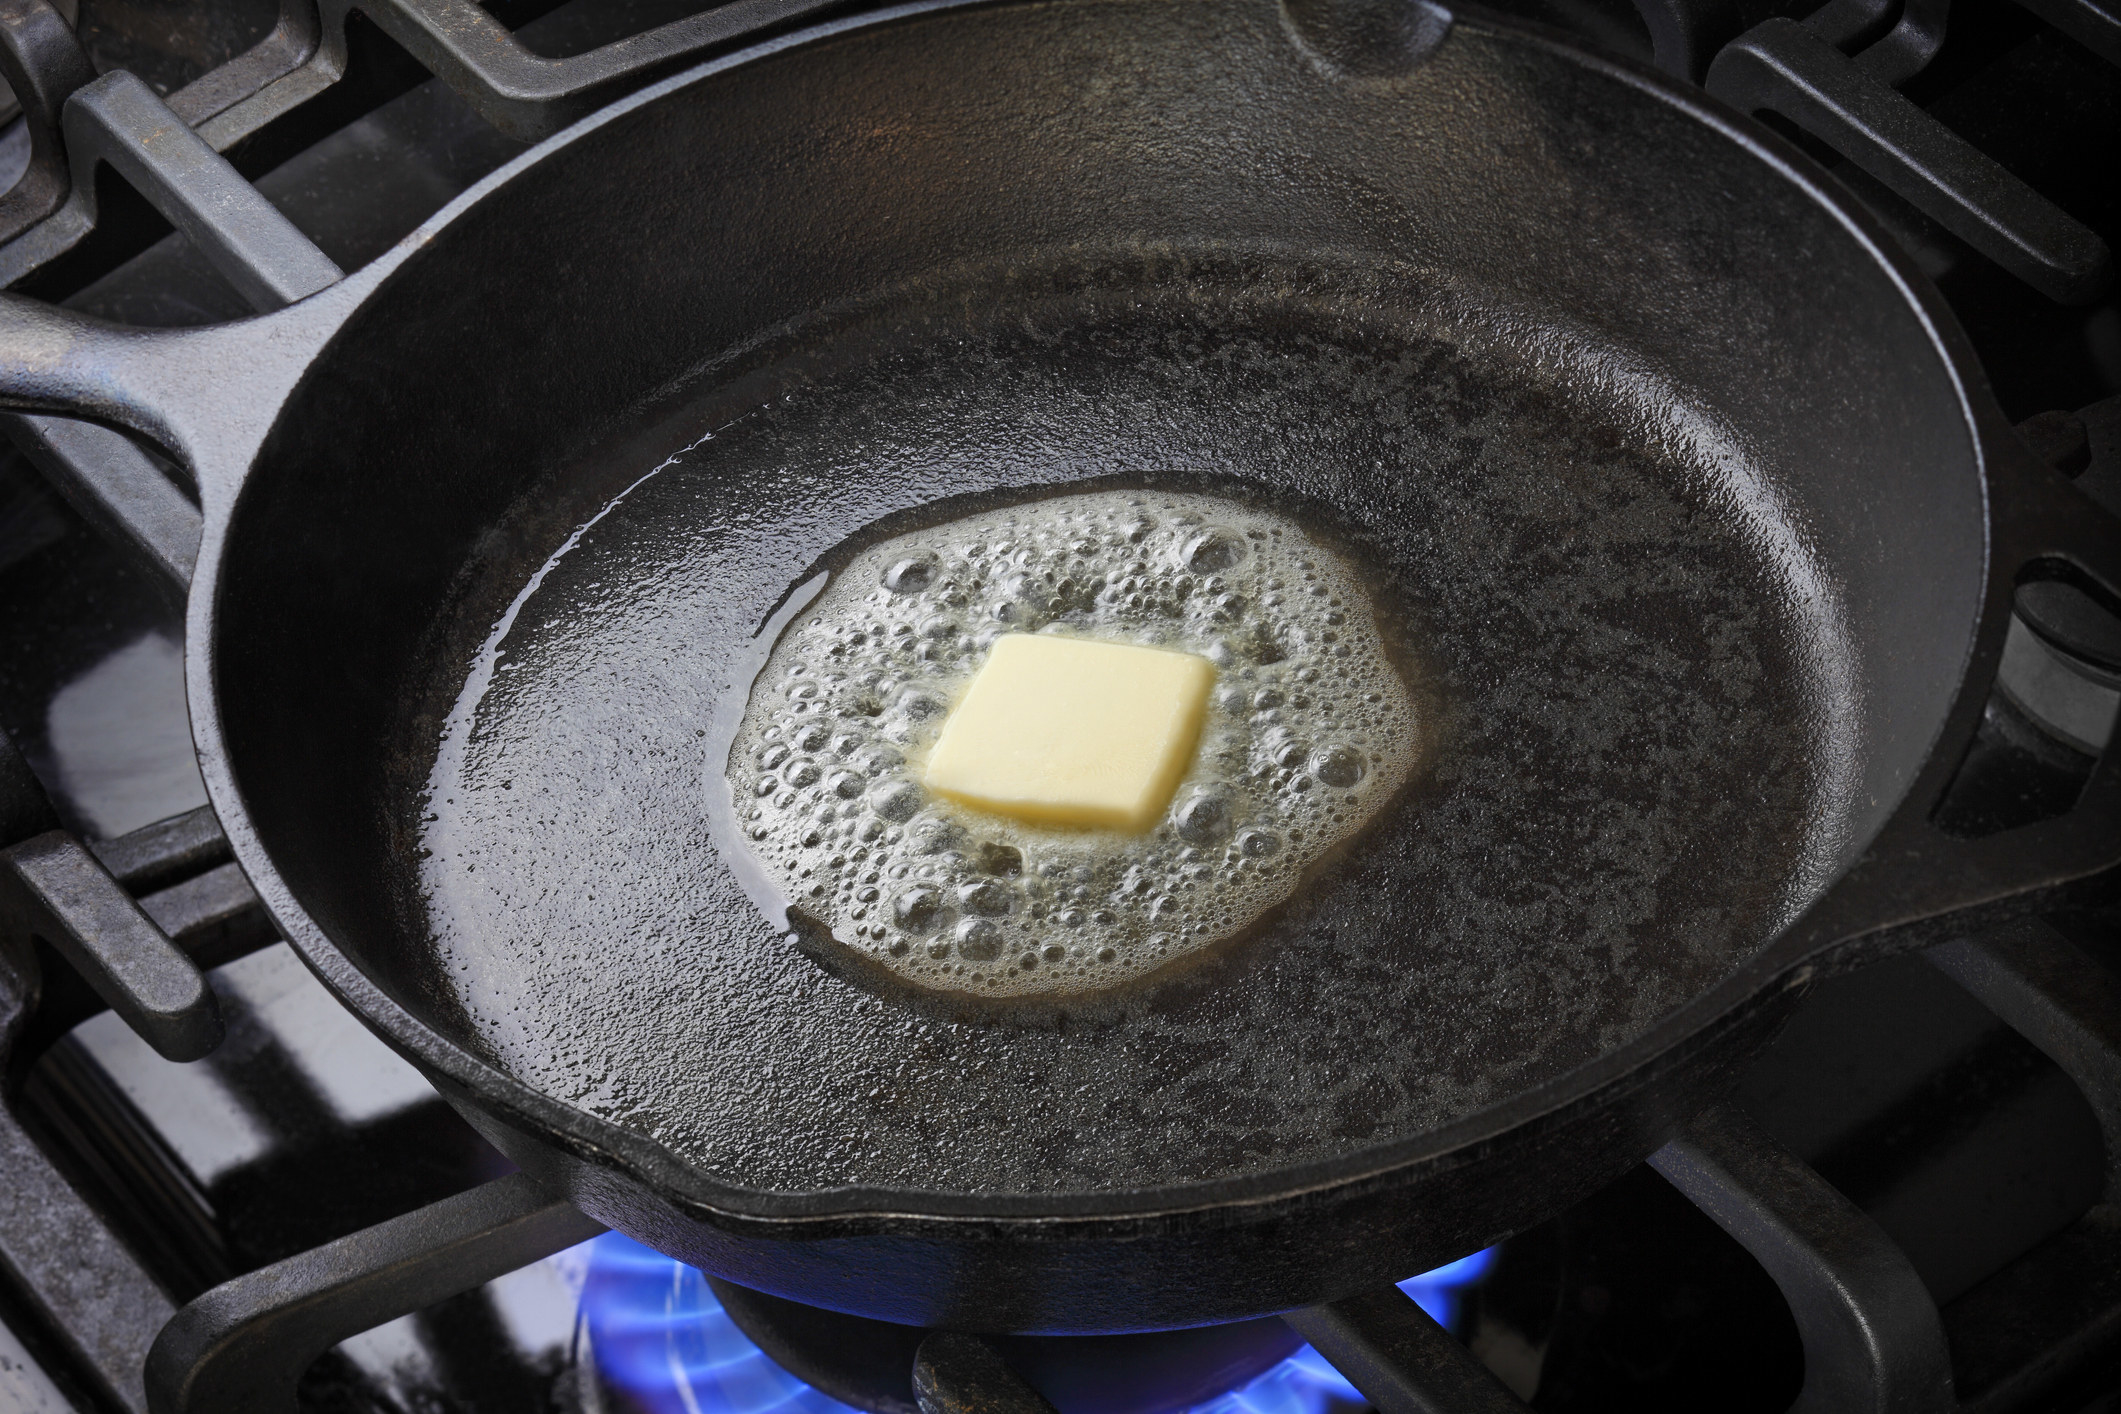 A square of butter melting in a skillet